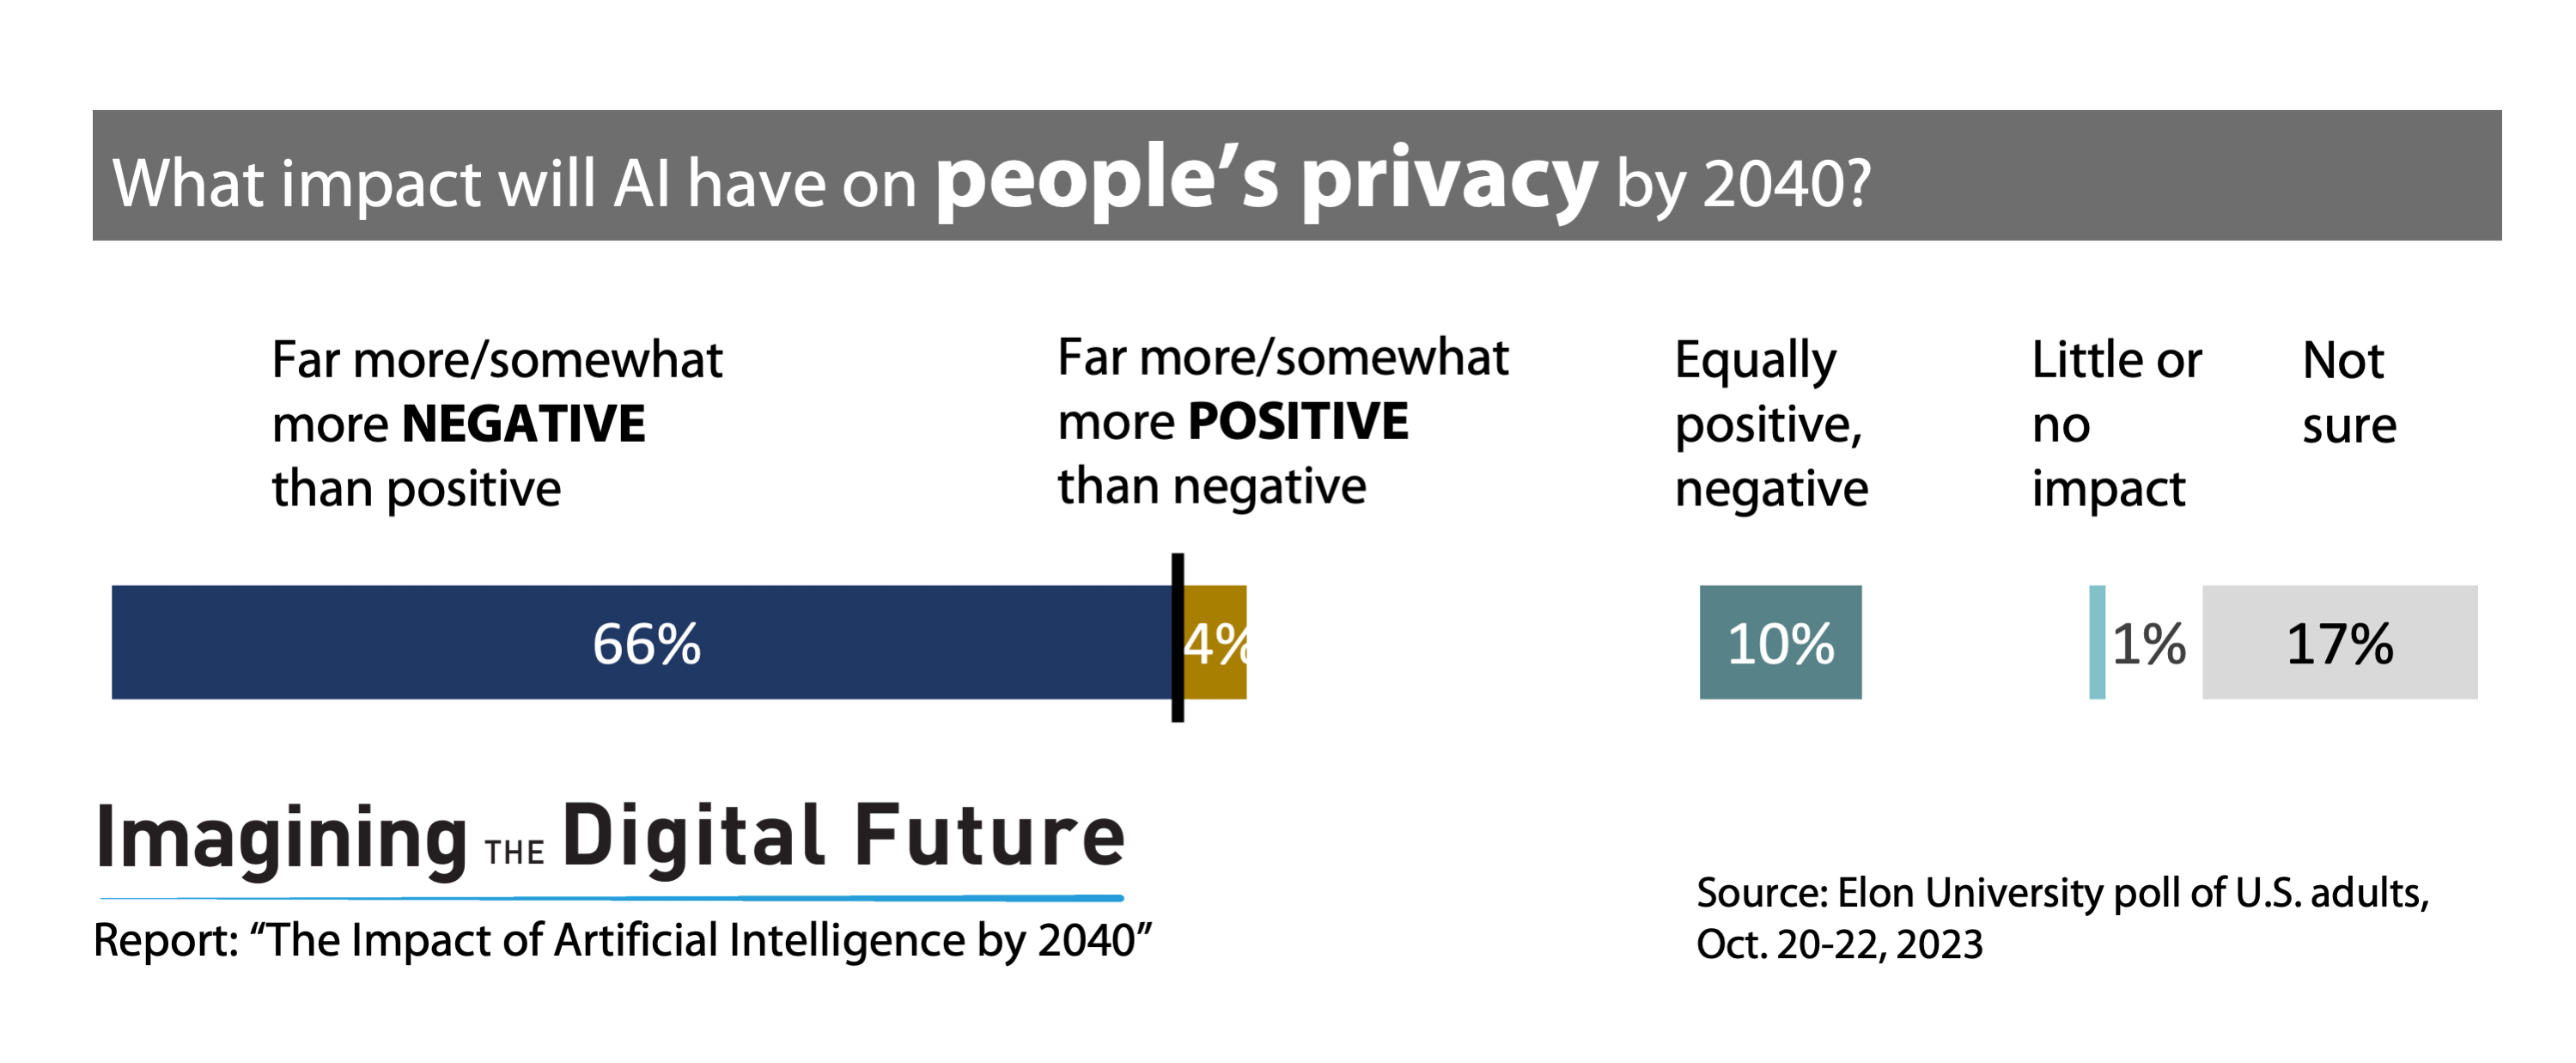 Impact of AI on people's privacy